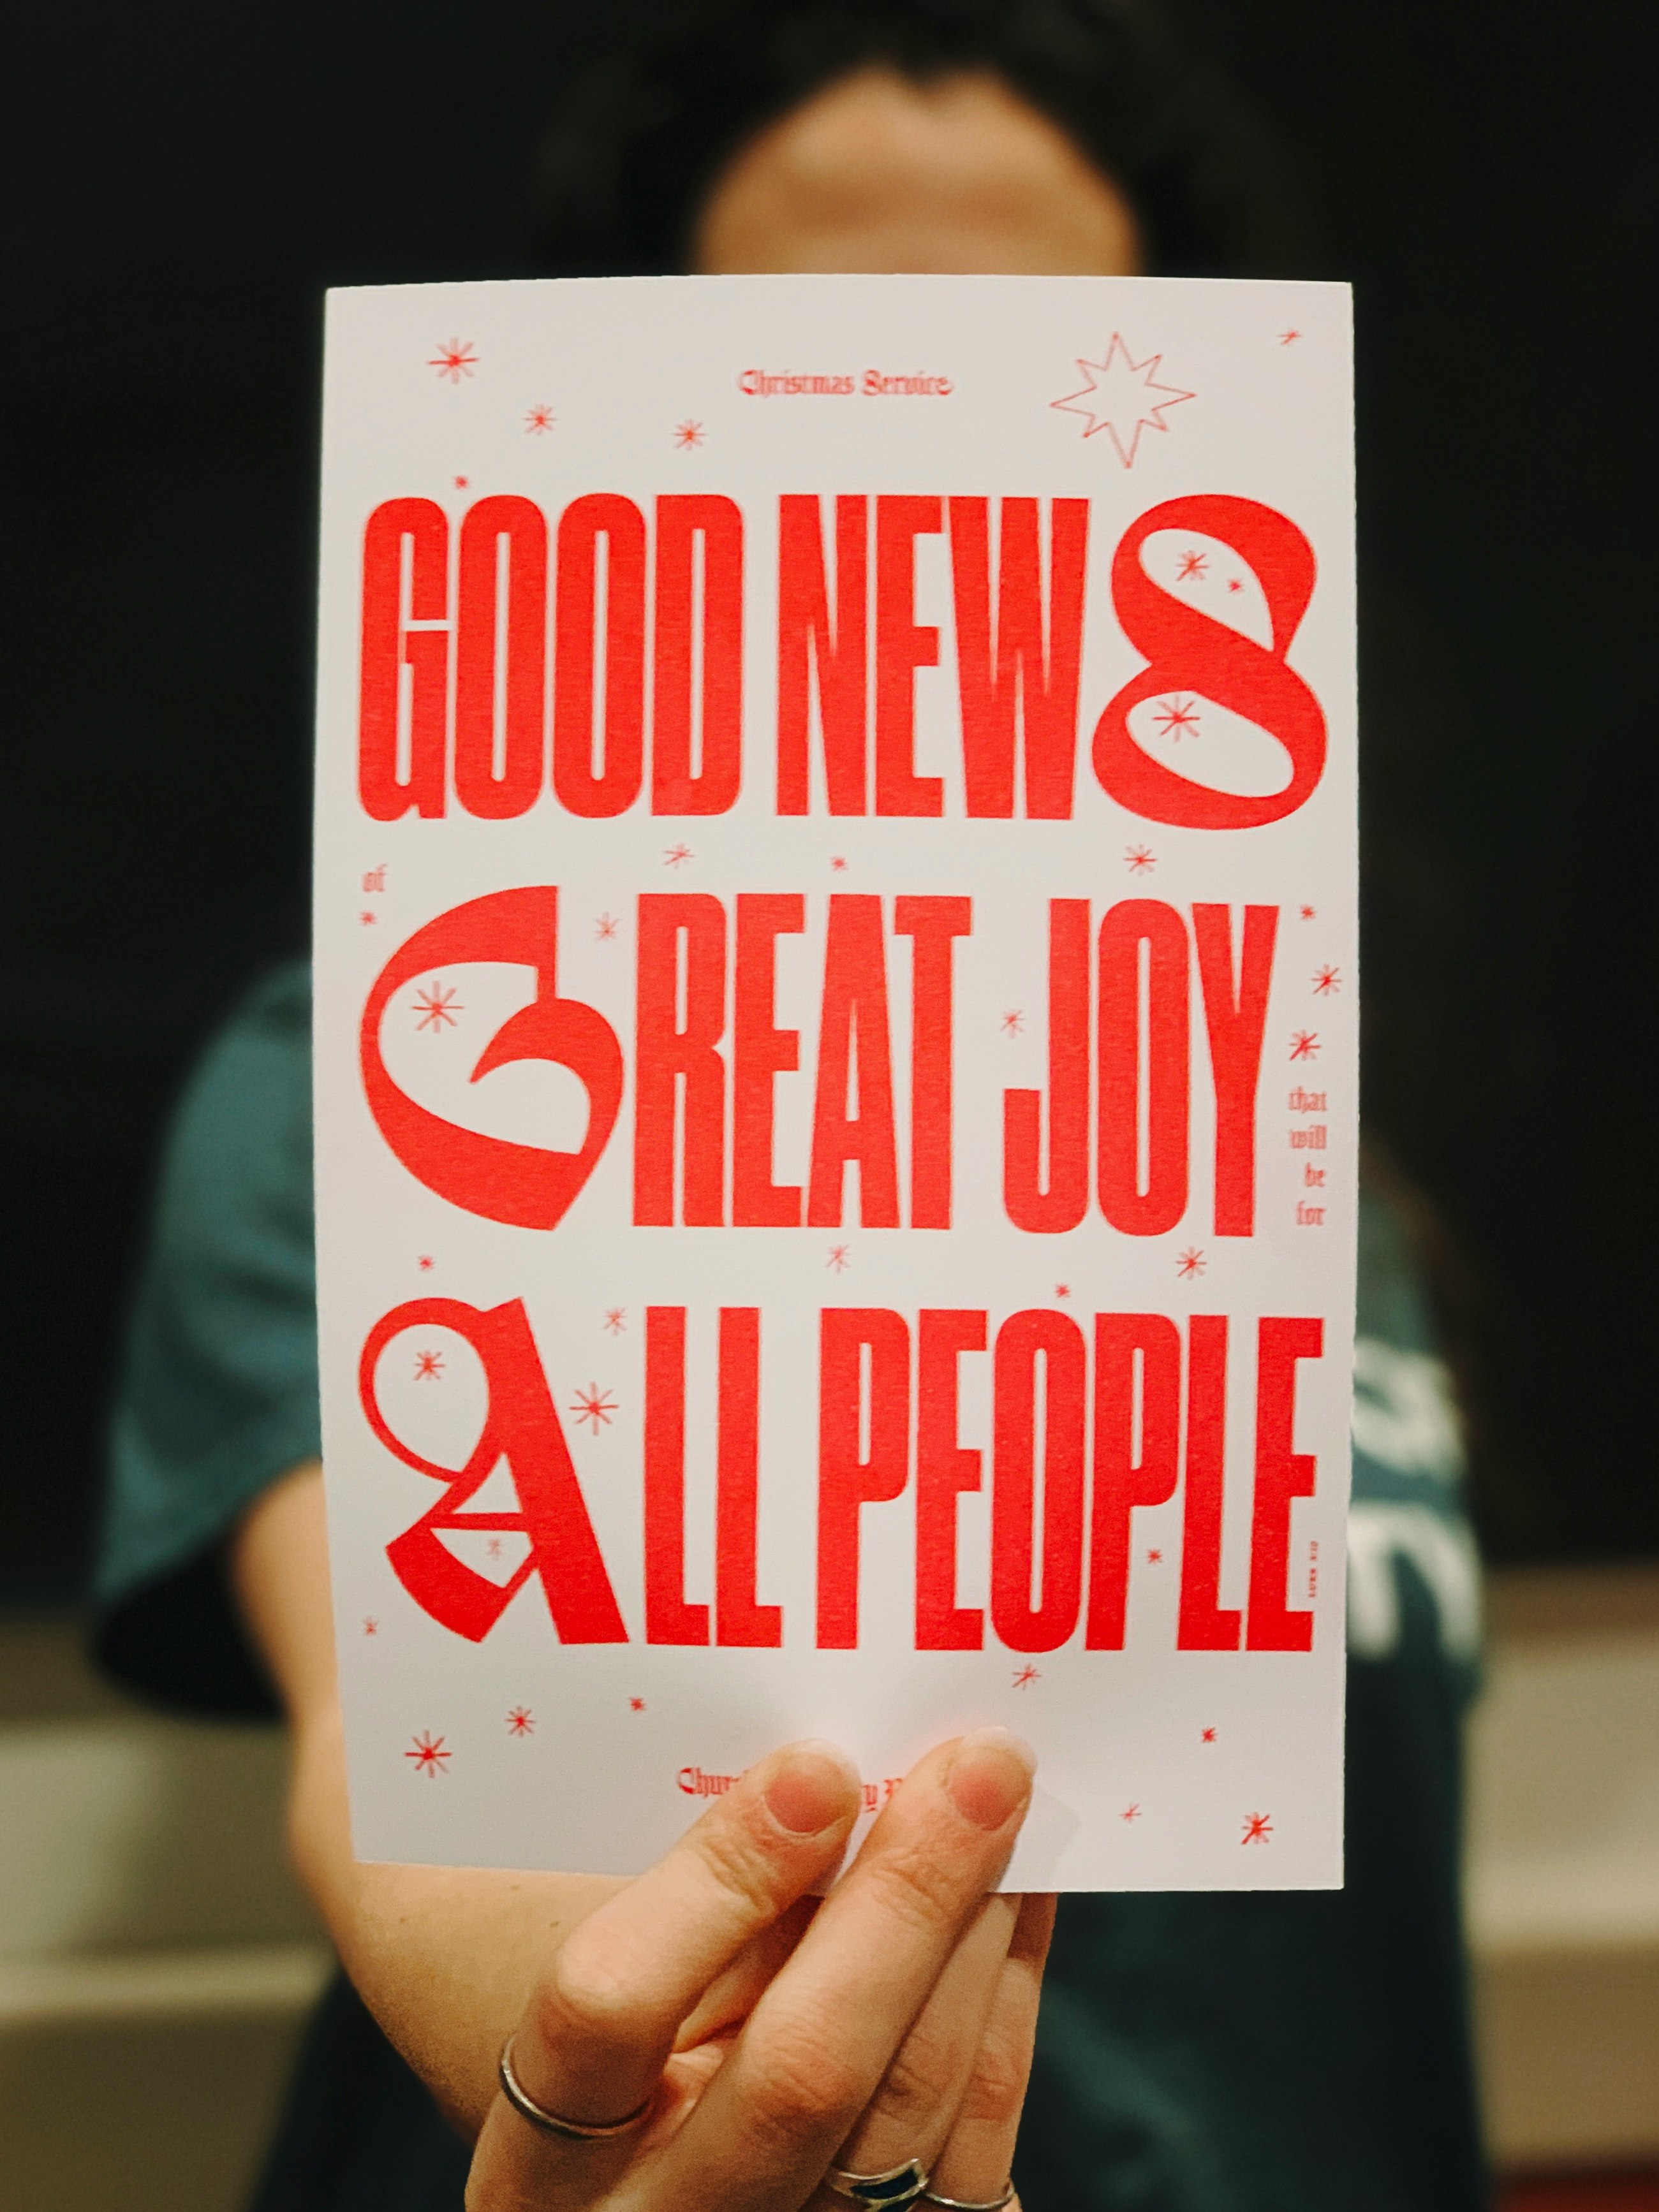 Good News Great Joy All People poster